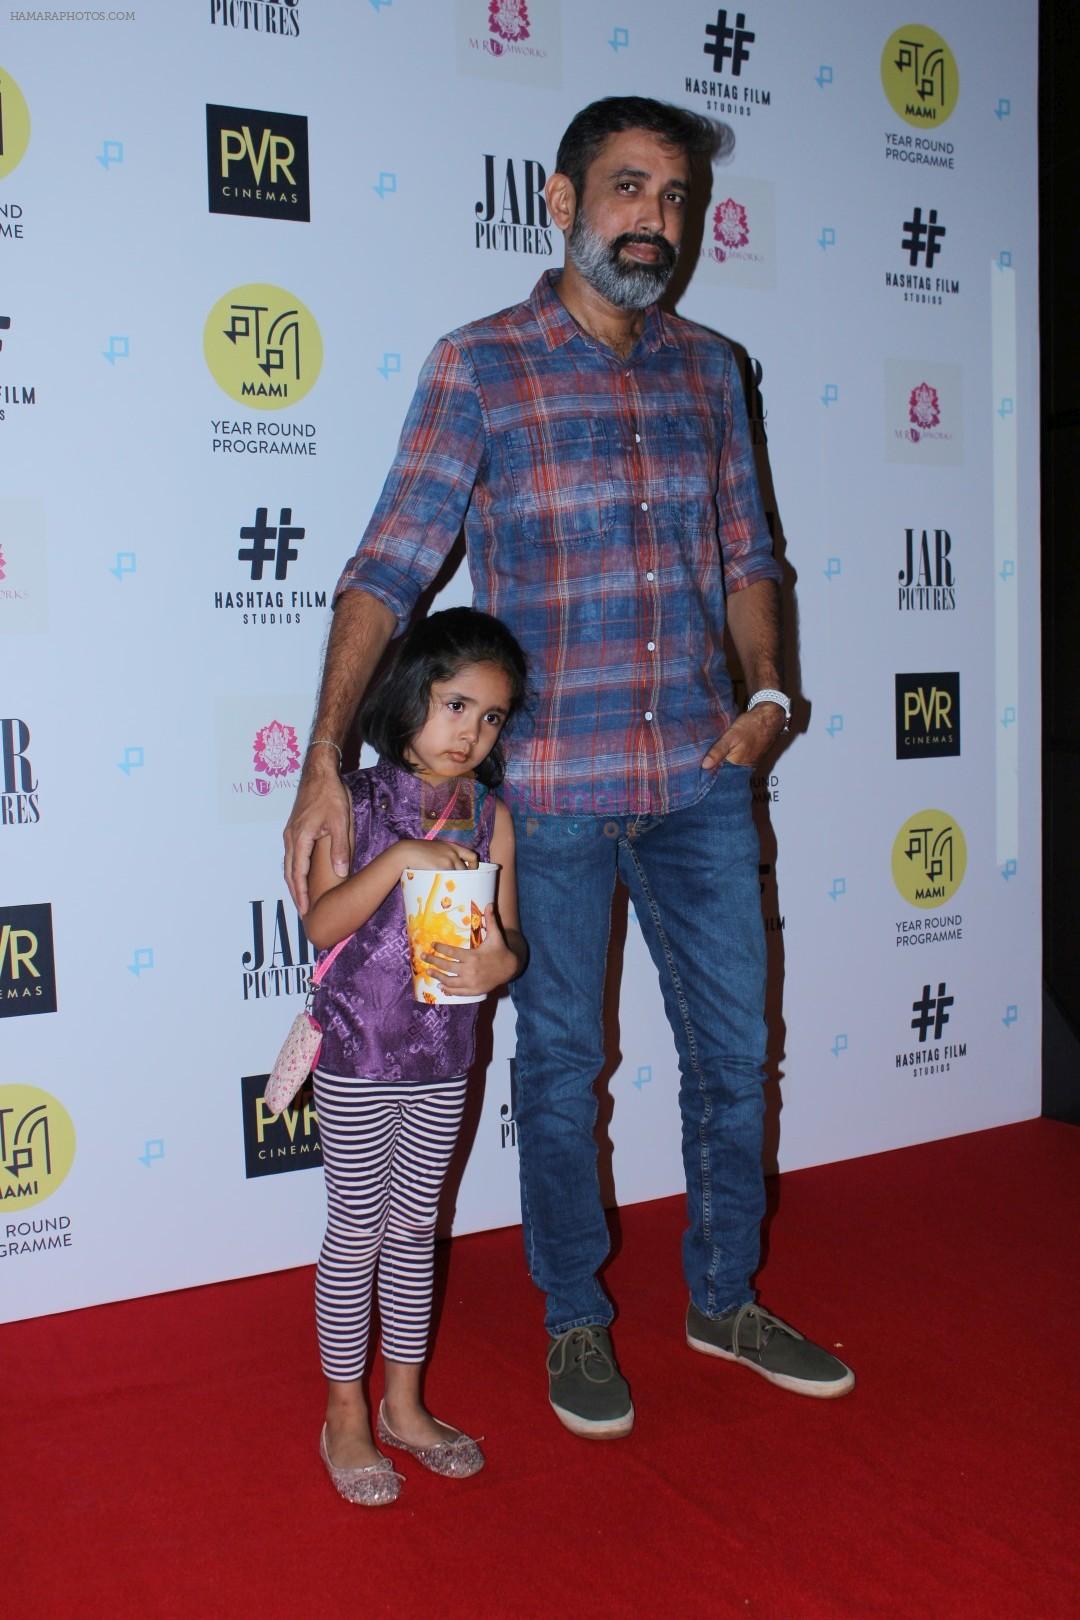 Shanker Raman at Gurgaon Film Premiere Hosted By MAMI Film Club on 1st Aug 2017